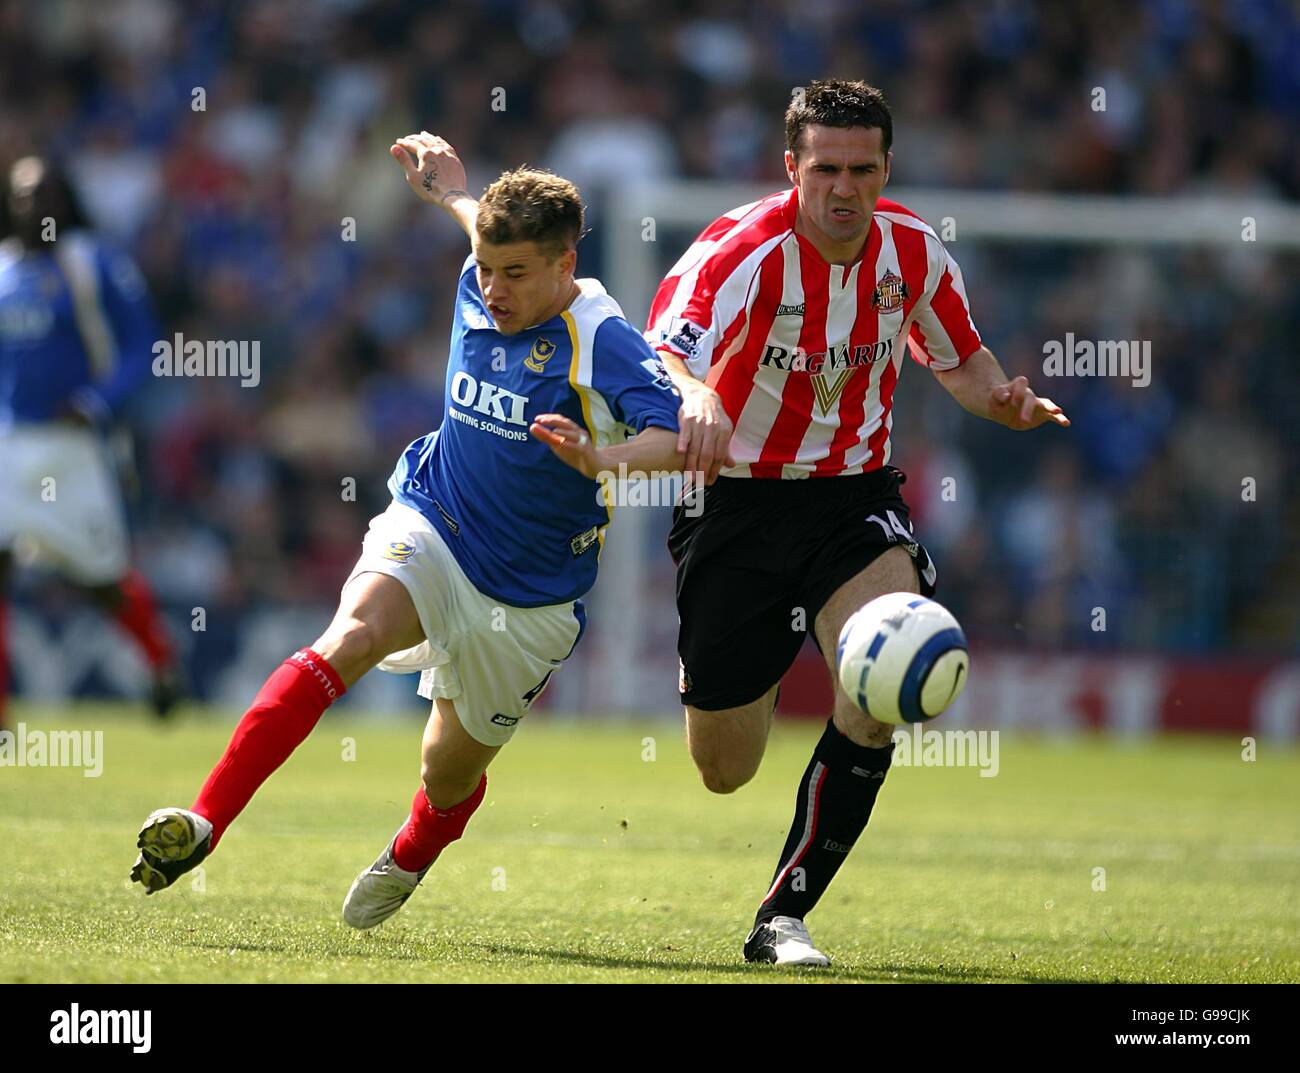 Soccer - FA Barclays Premiership - Portsmouth v Sunderland - Fratton Park. Portsmouth's Andres D'Alessandro is challenged by Sunderland's Tommy Miller Stock Photo